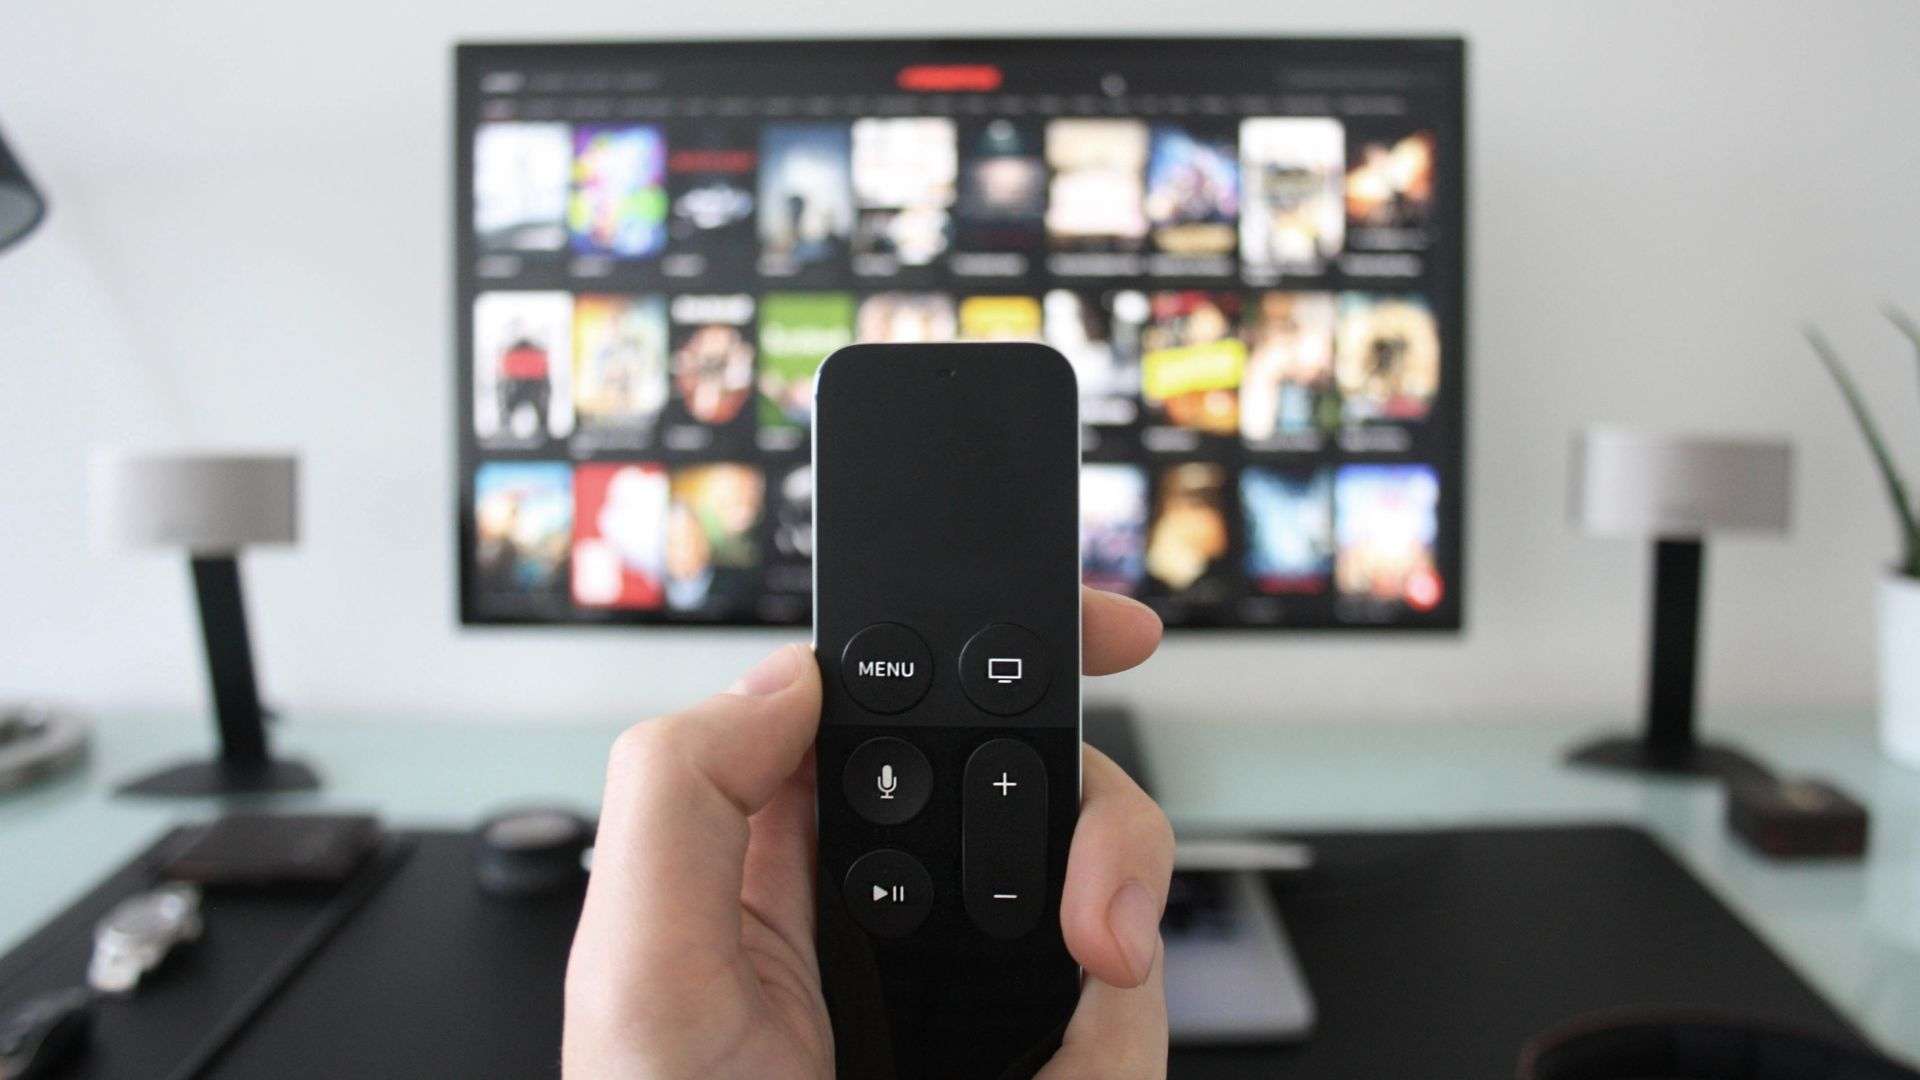 A closeup of a remote with large screen in the background with streaming service menu on it.